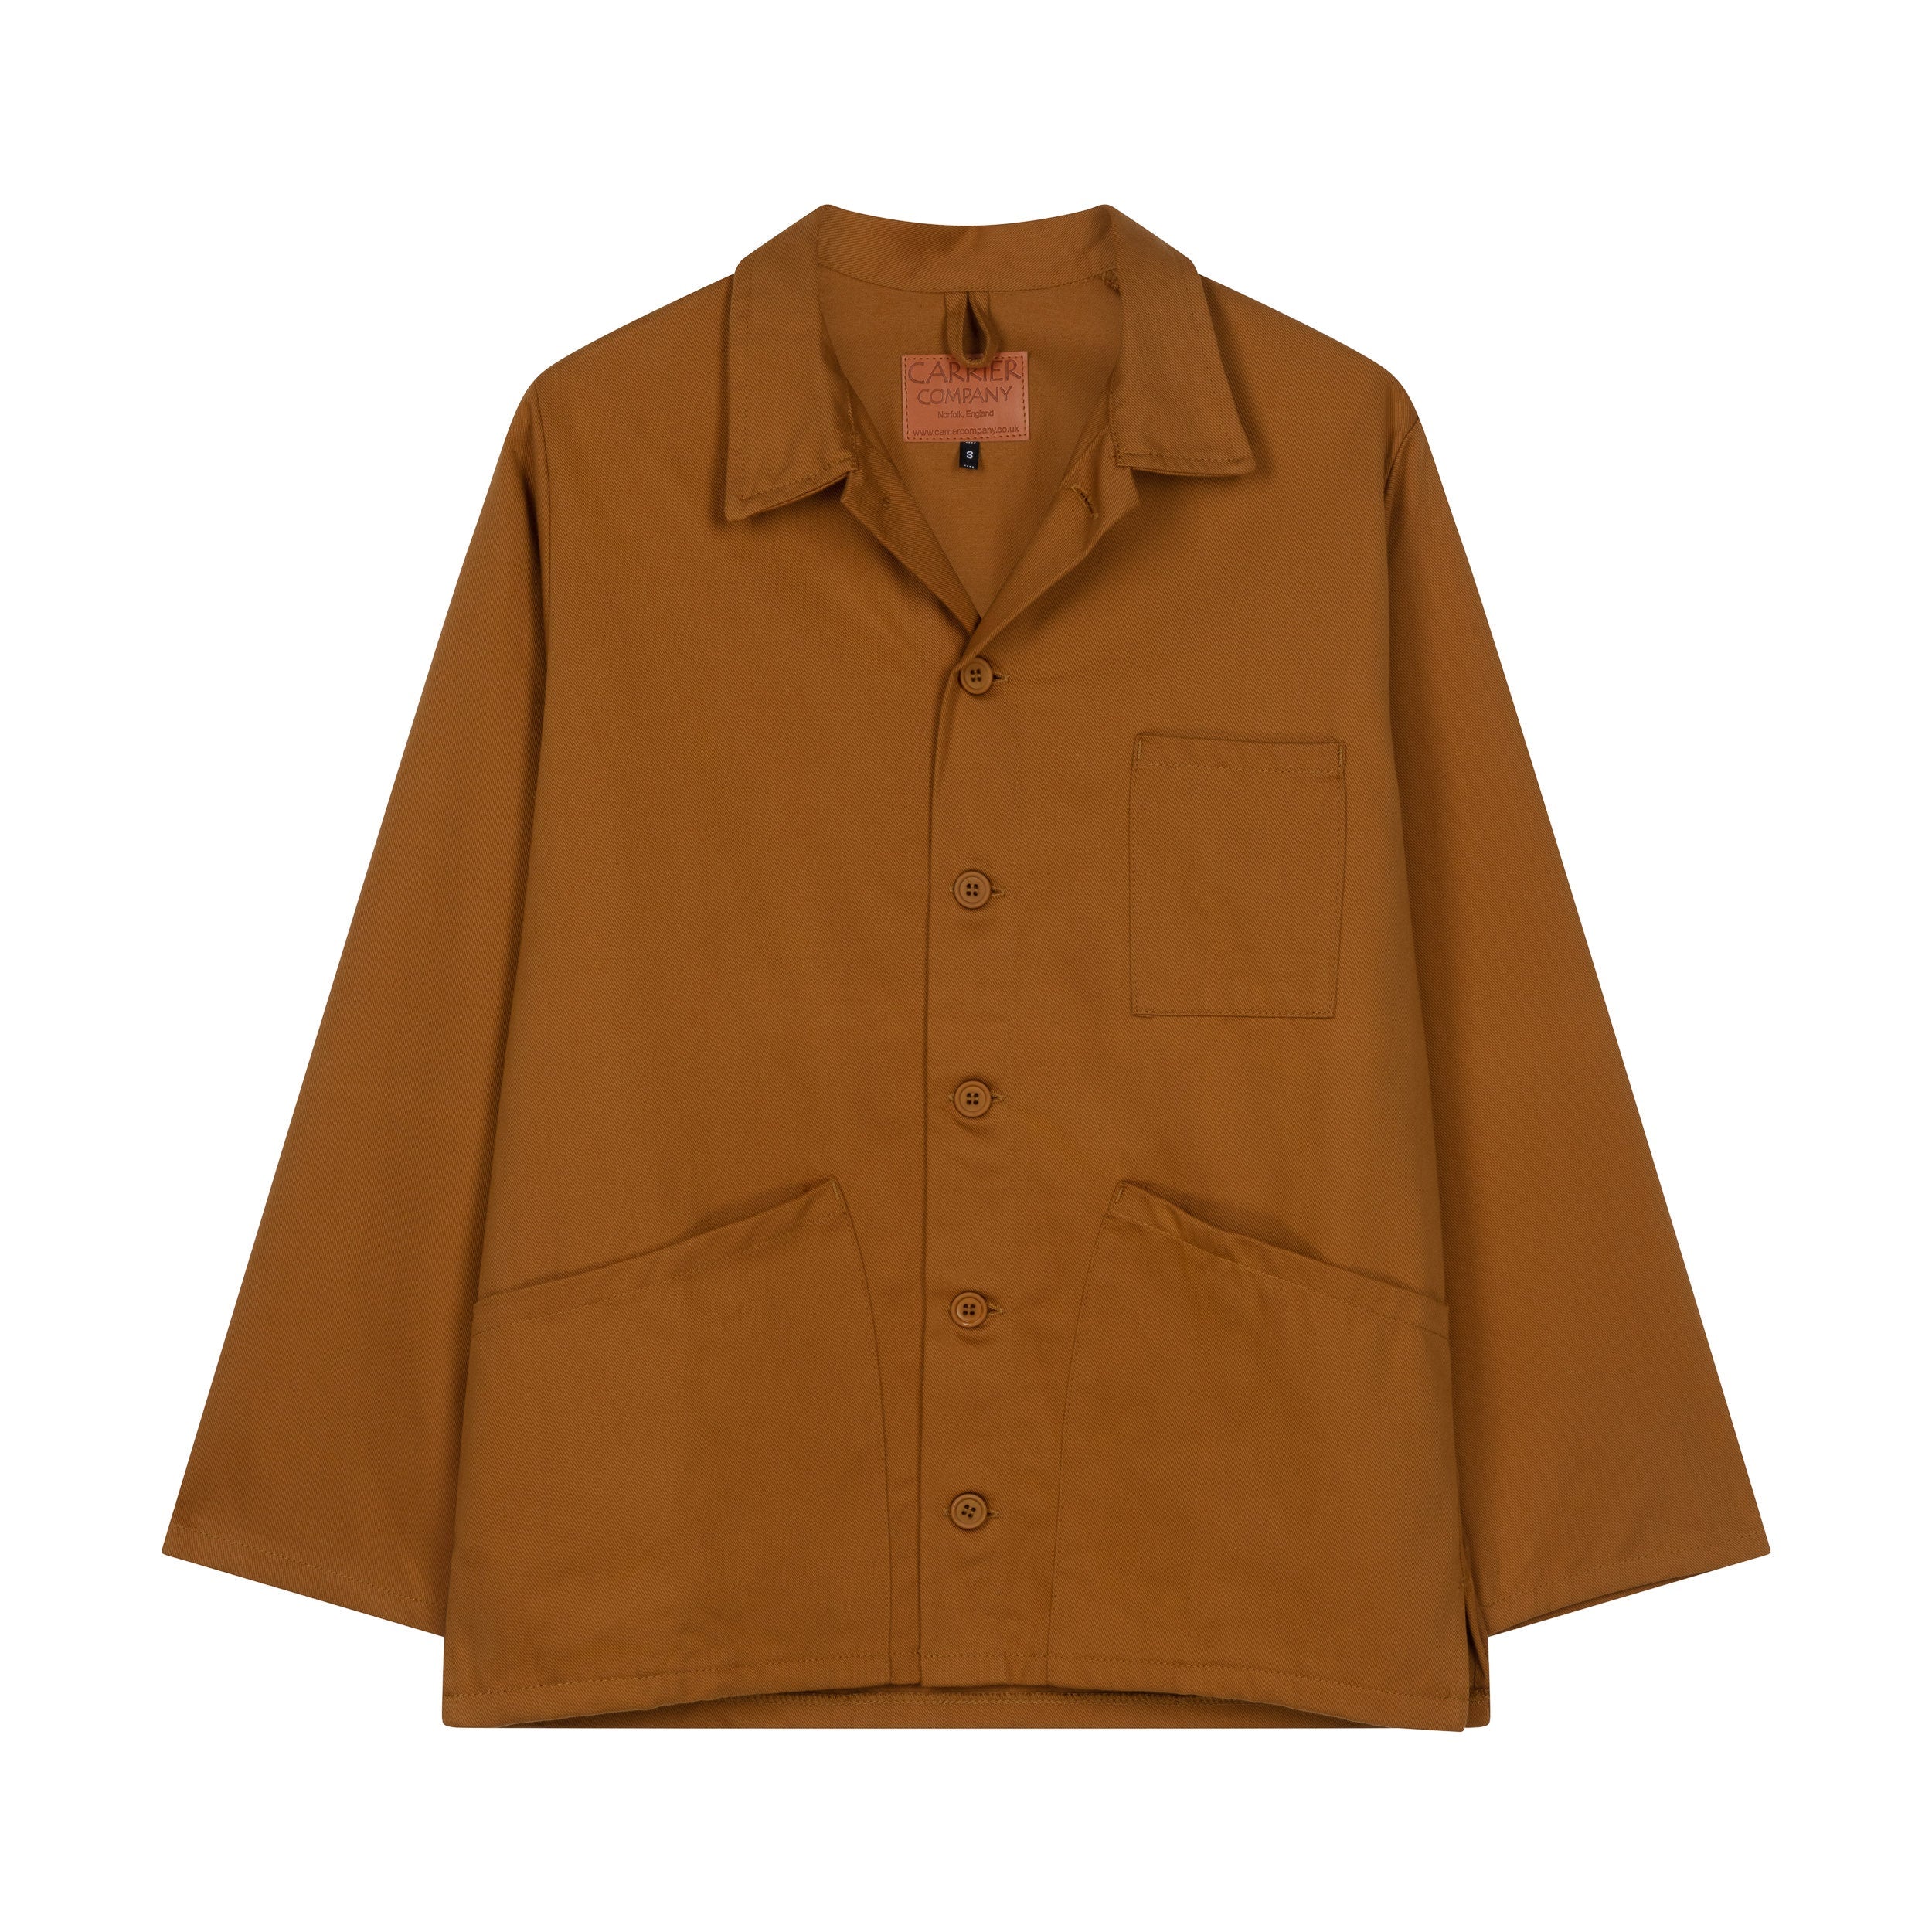 Carrier Company Work Jacket in Tan